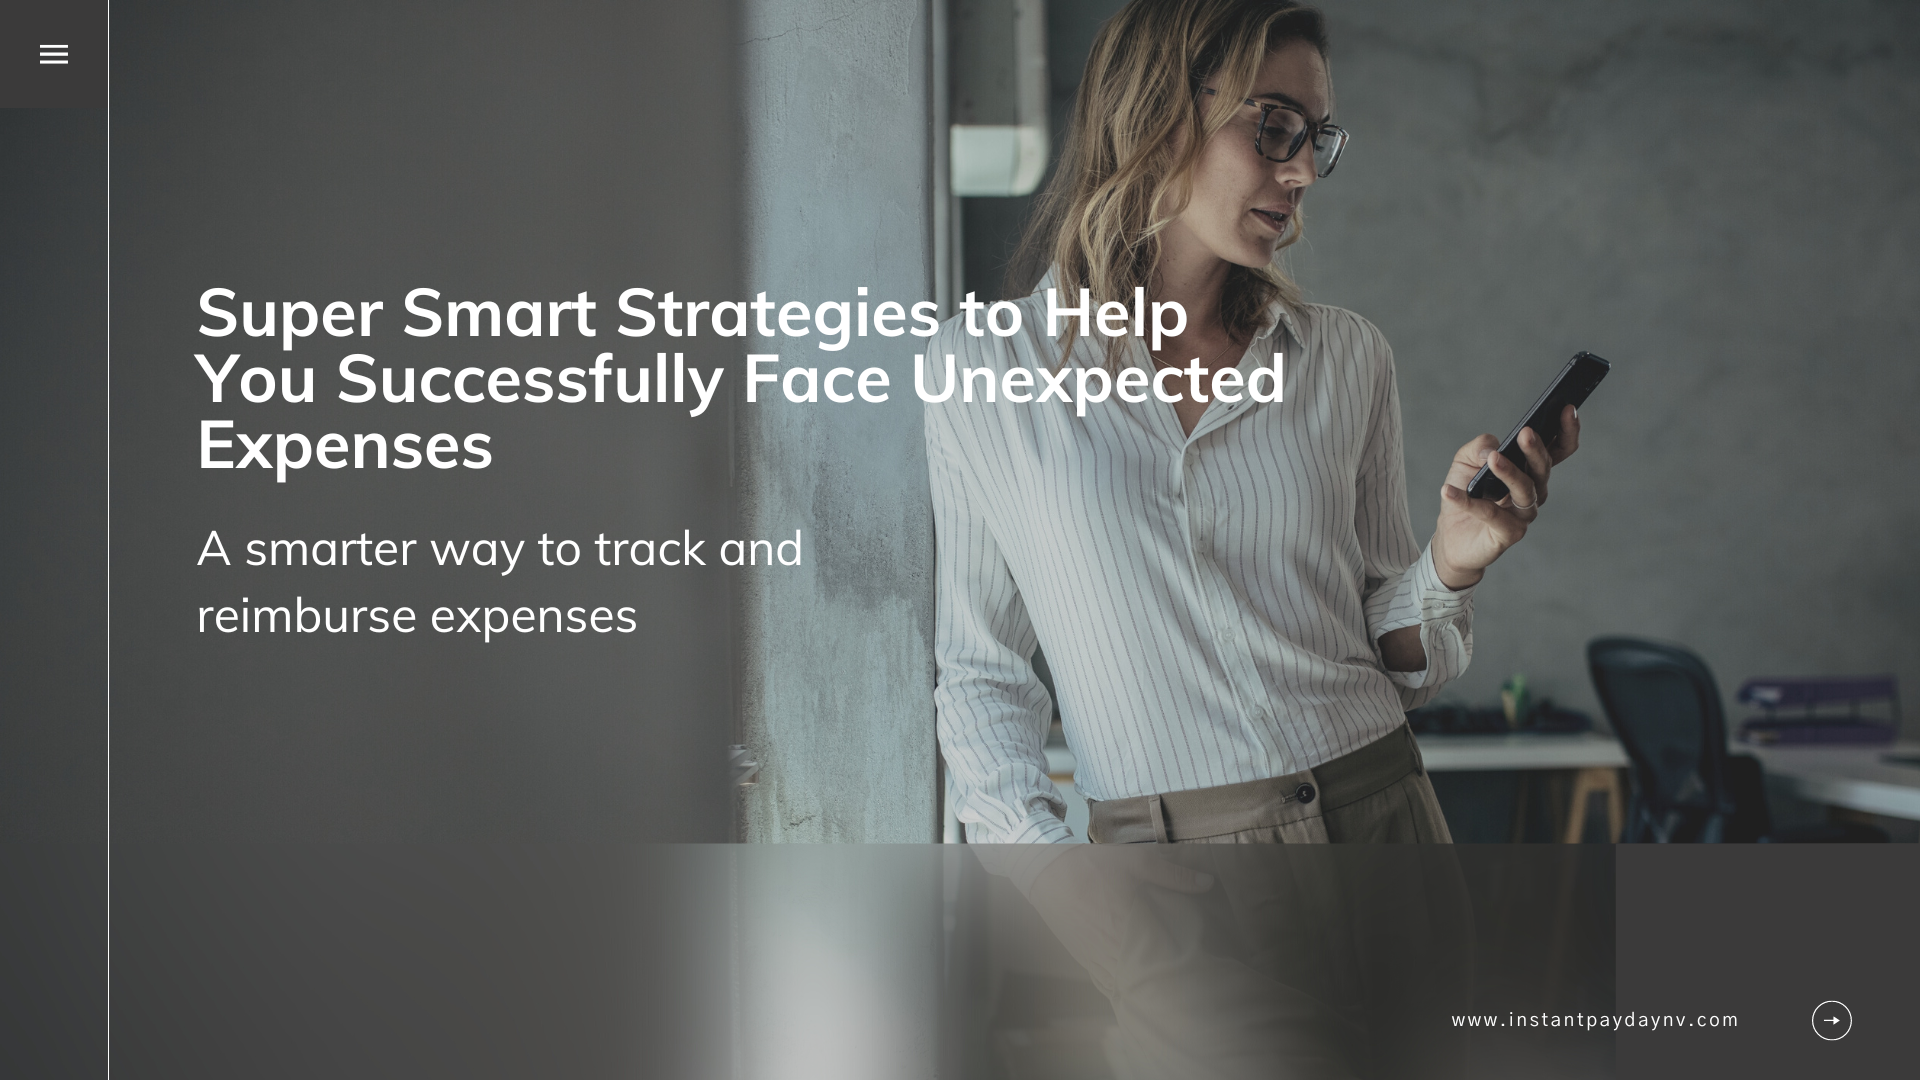 Super-Smart-Strategies-to-Help-You-Successfully-Face-Unexpected-Expenses